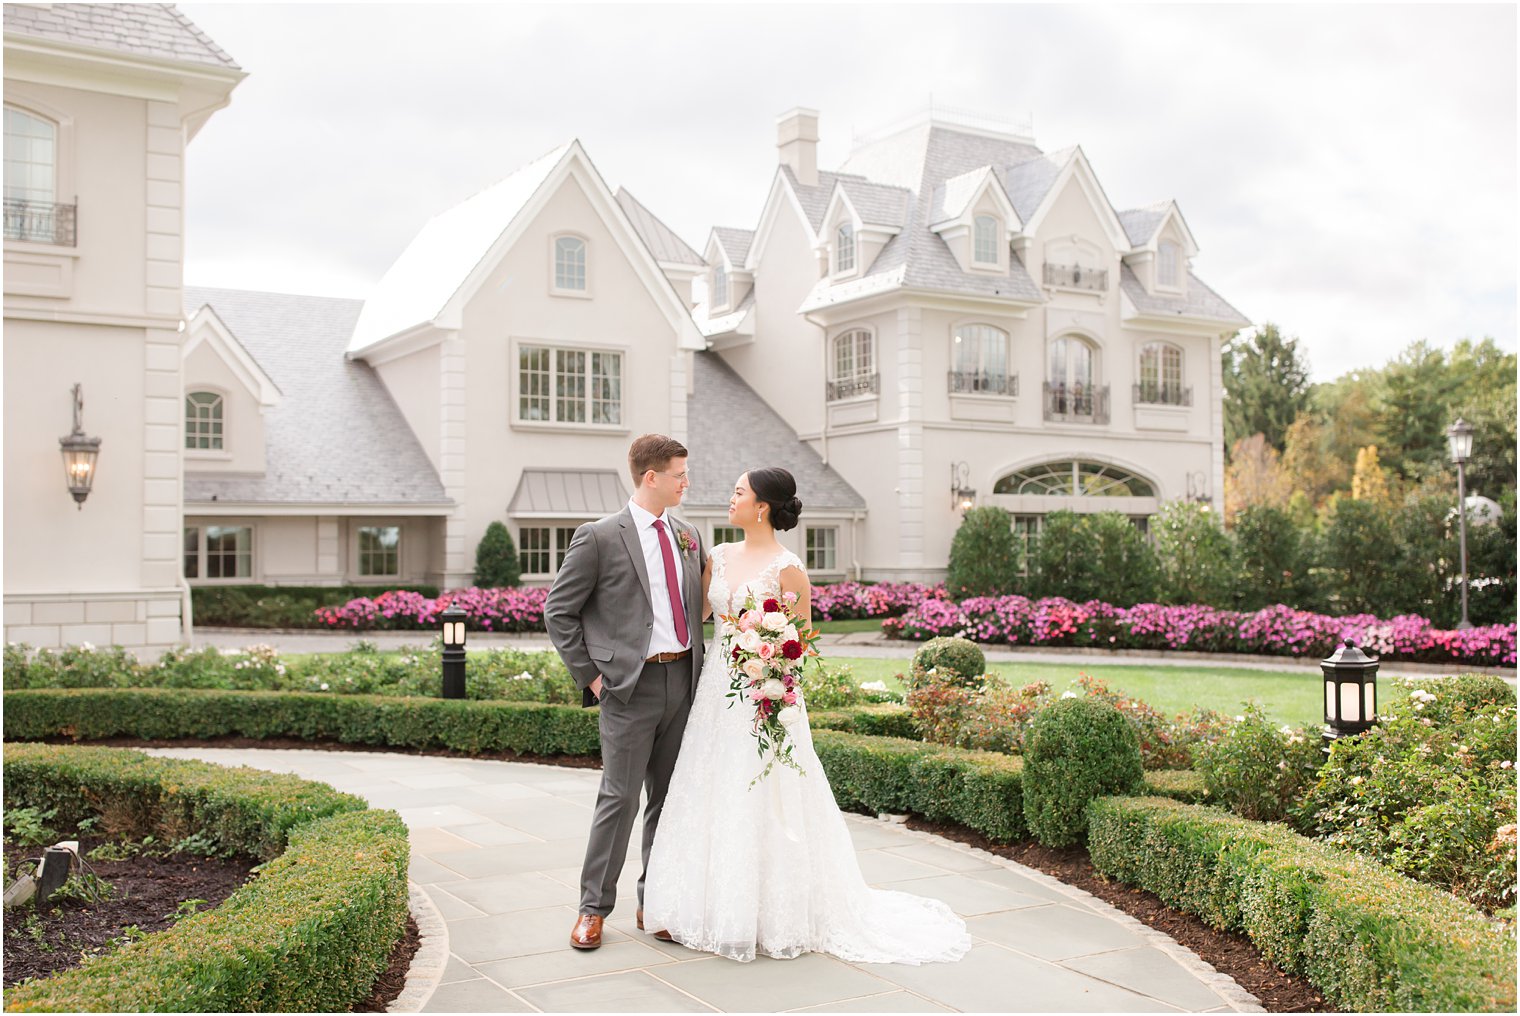 Park Chateau Wedding published in Contemporary Weddings Magazine